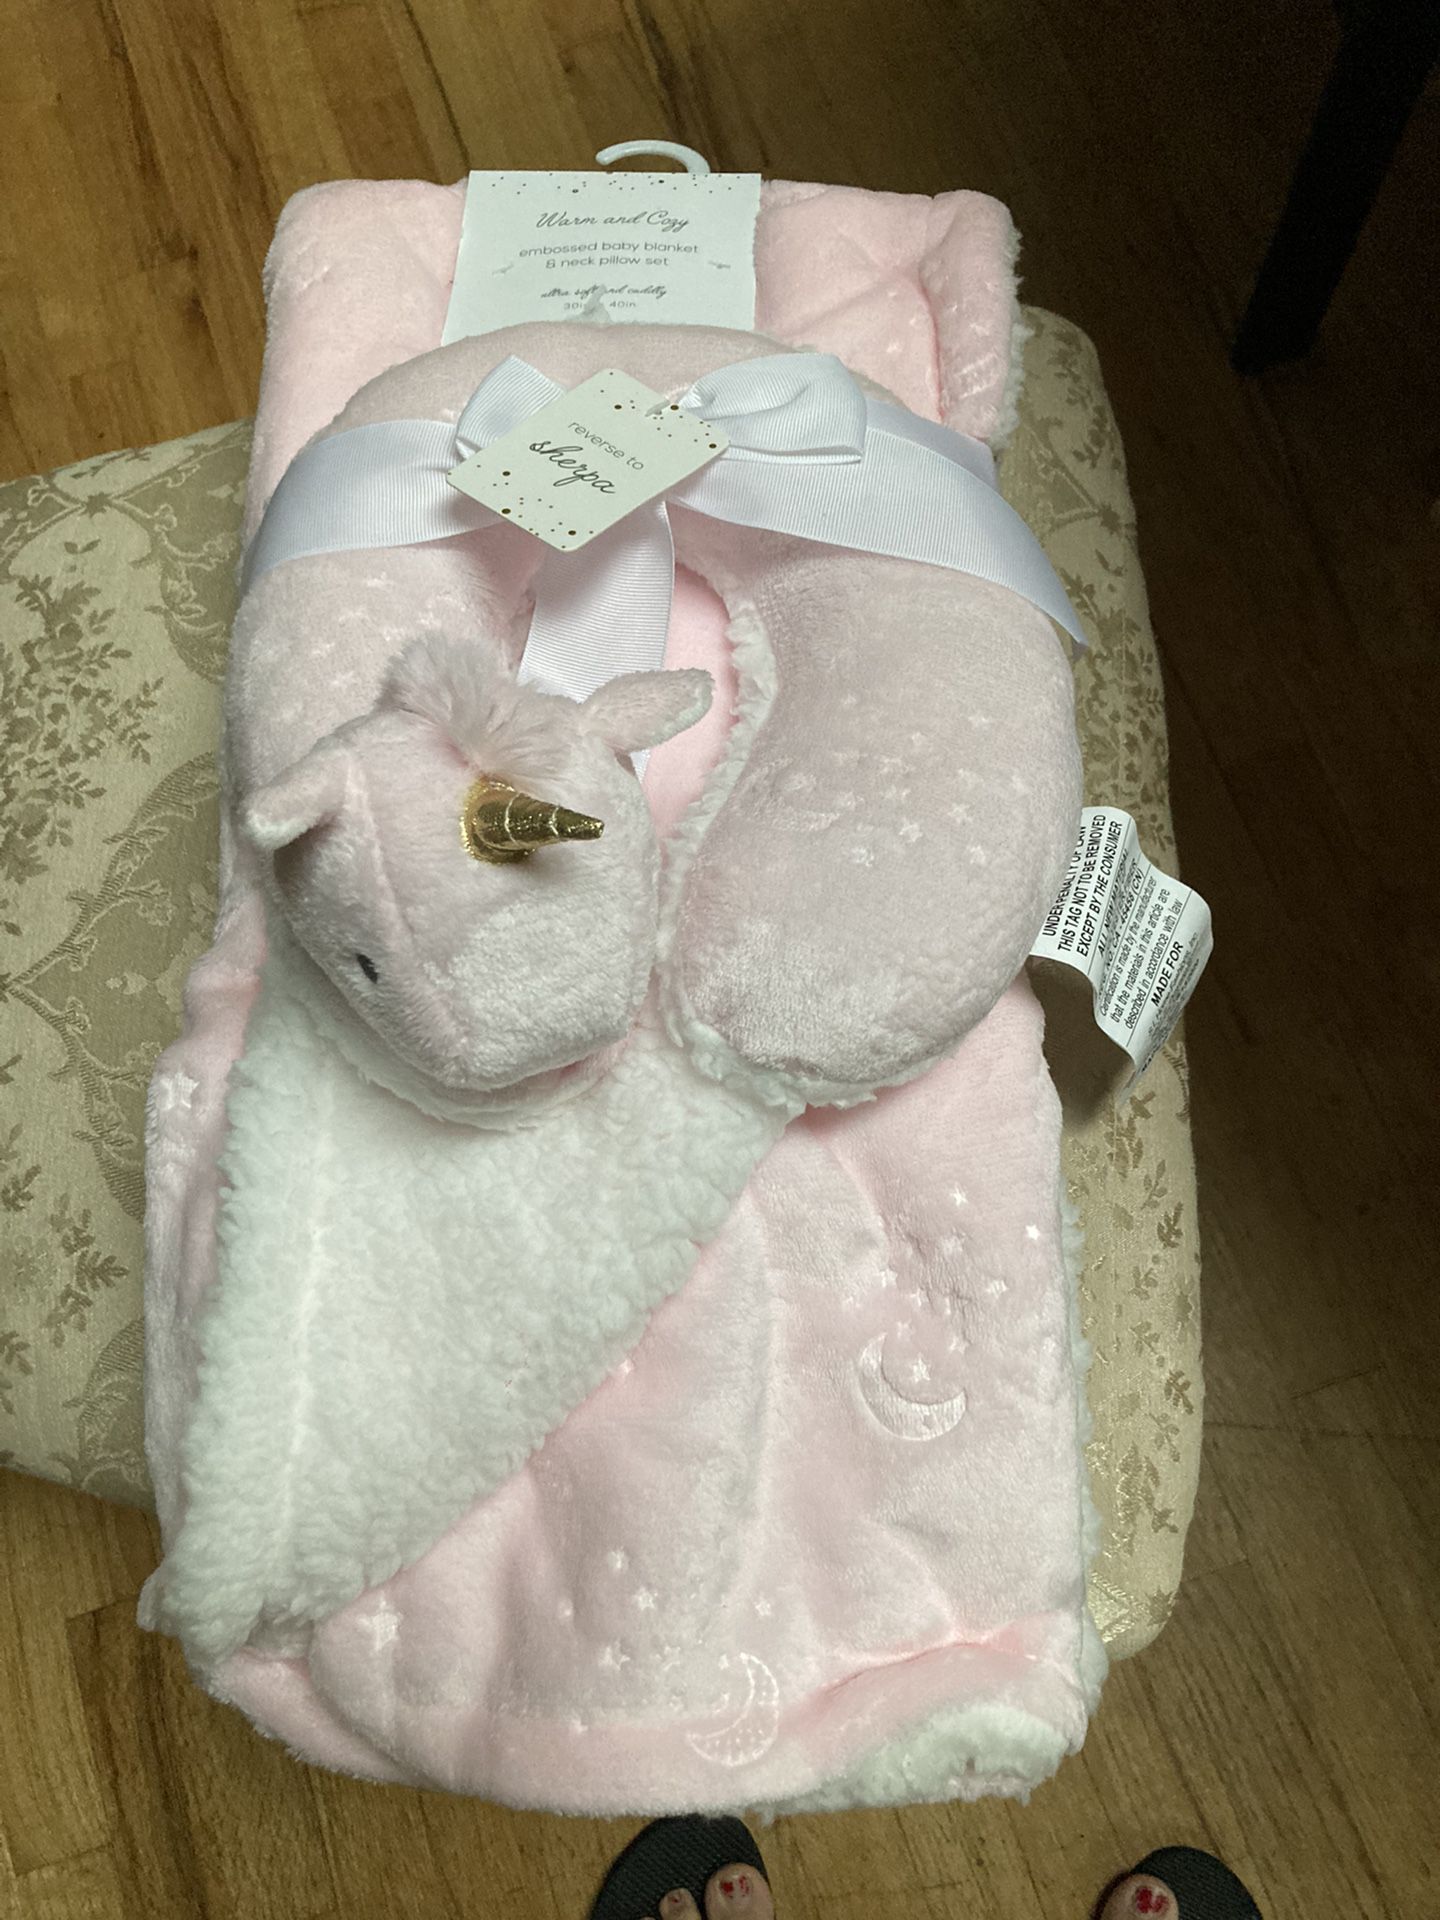 Wmbrassed Baby Blanket & Neck Pillow Set